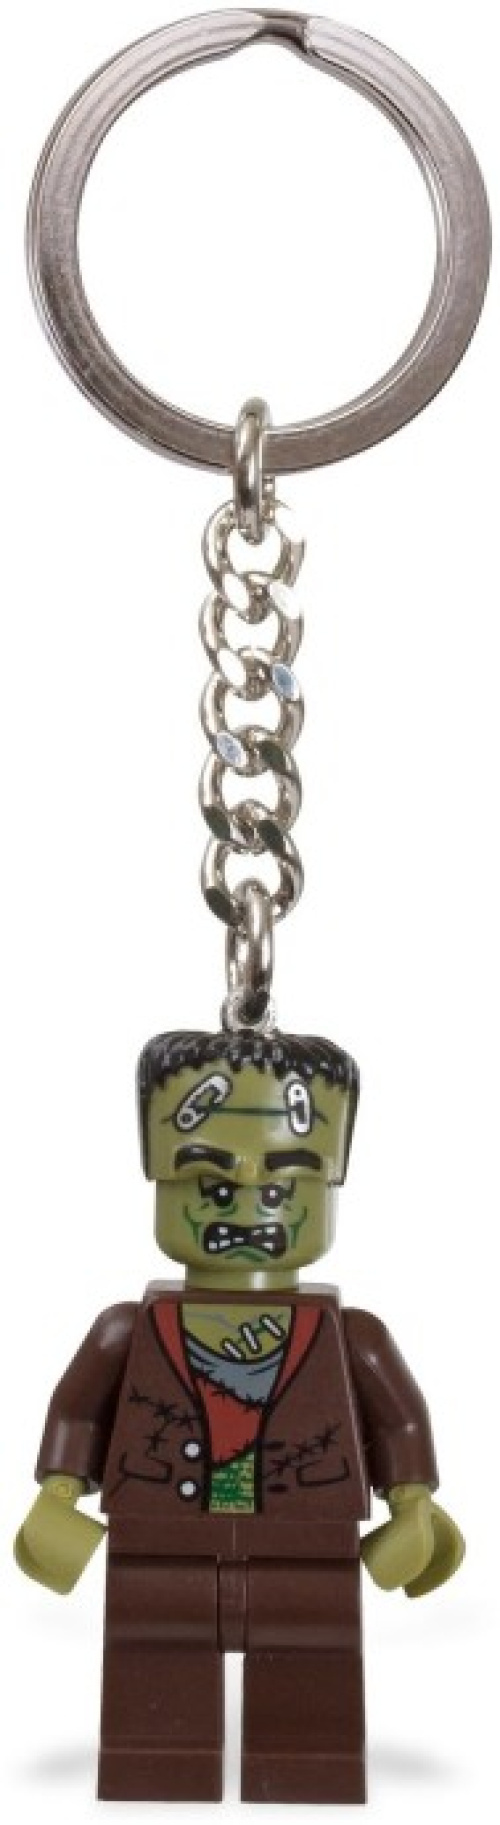 850453-1 The Monster Key Chain